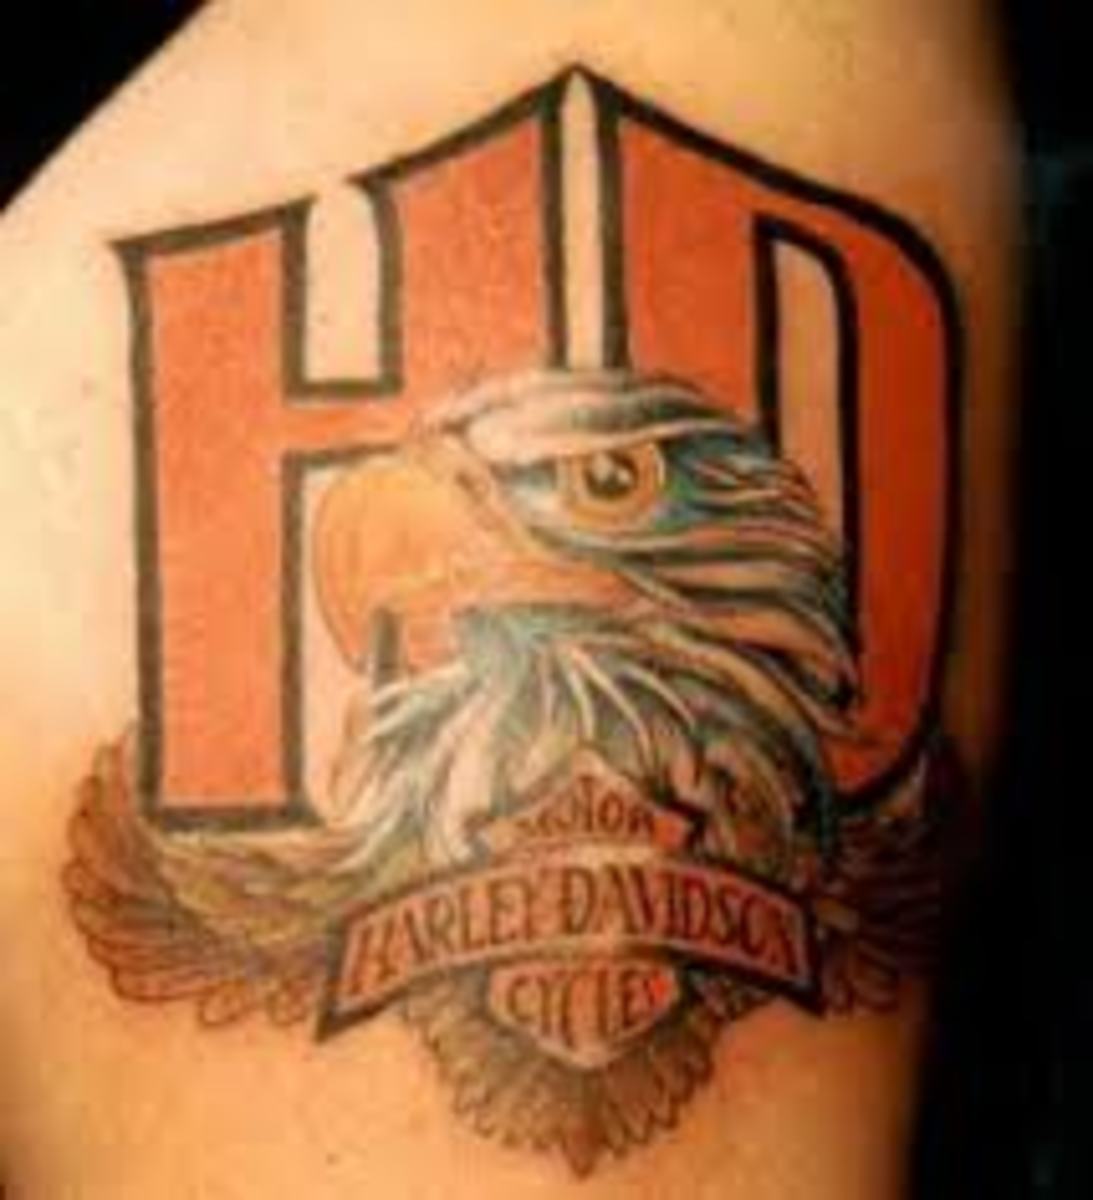 harley-davidson-tattoos-and-history-harley-davidson-tattoo-designs-ideas-and-meanings